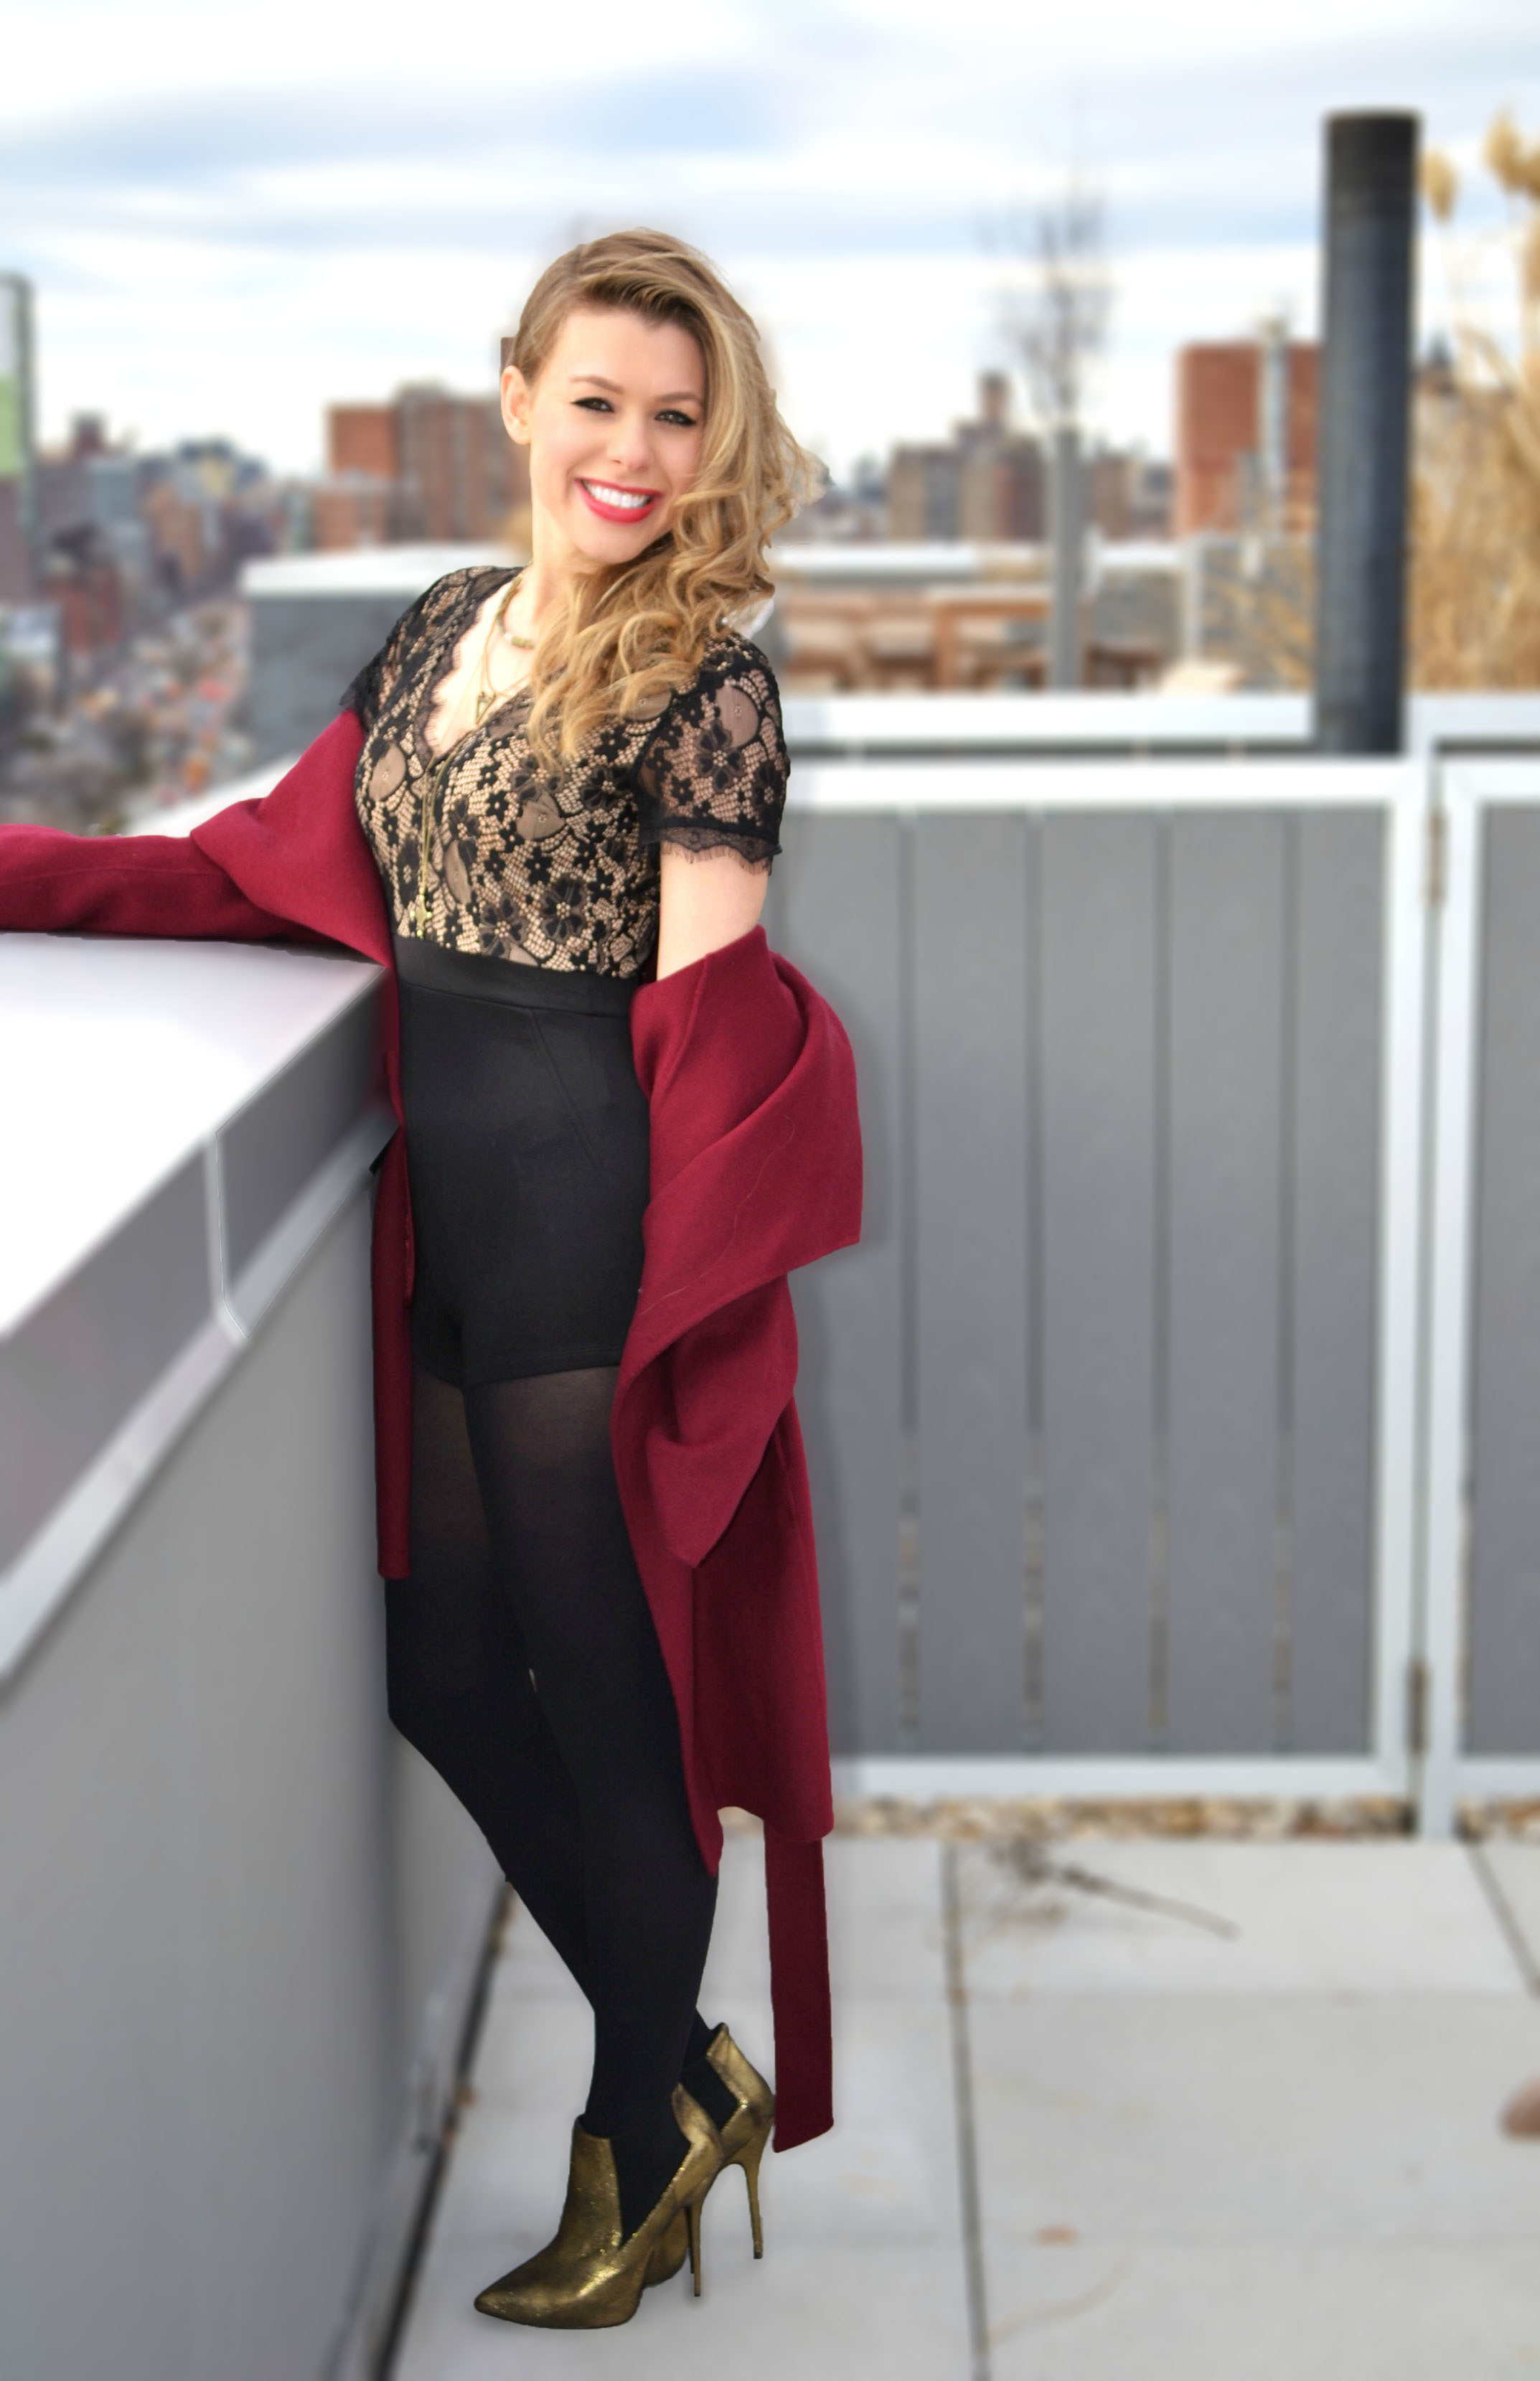 Women's Burgundy Coat, Black Lace Playsuit, Gold Leather Ankle Boots, Black  Tights